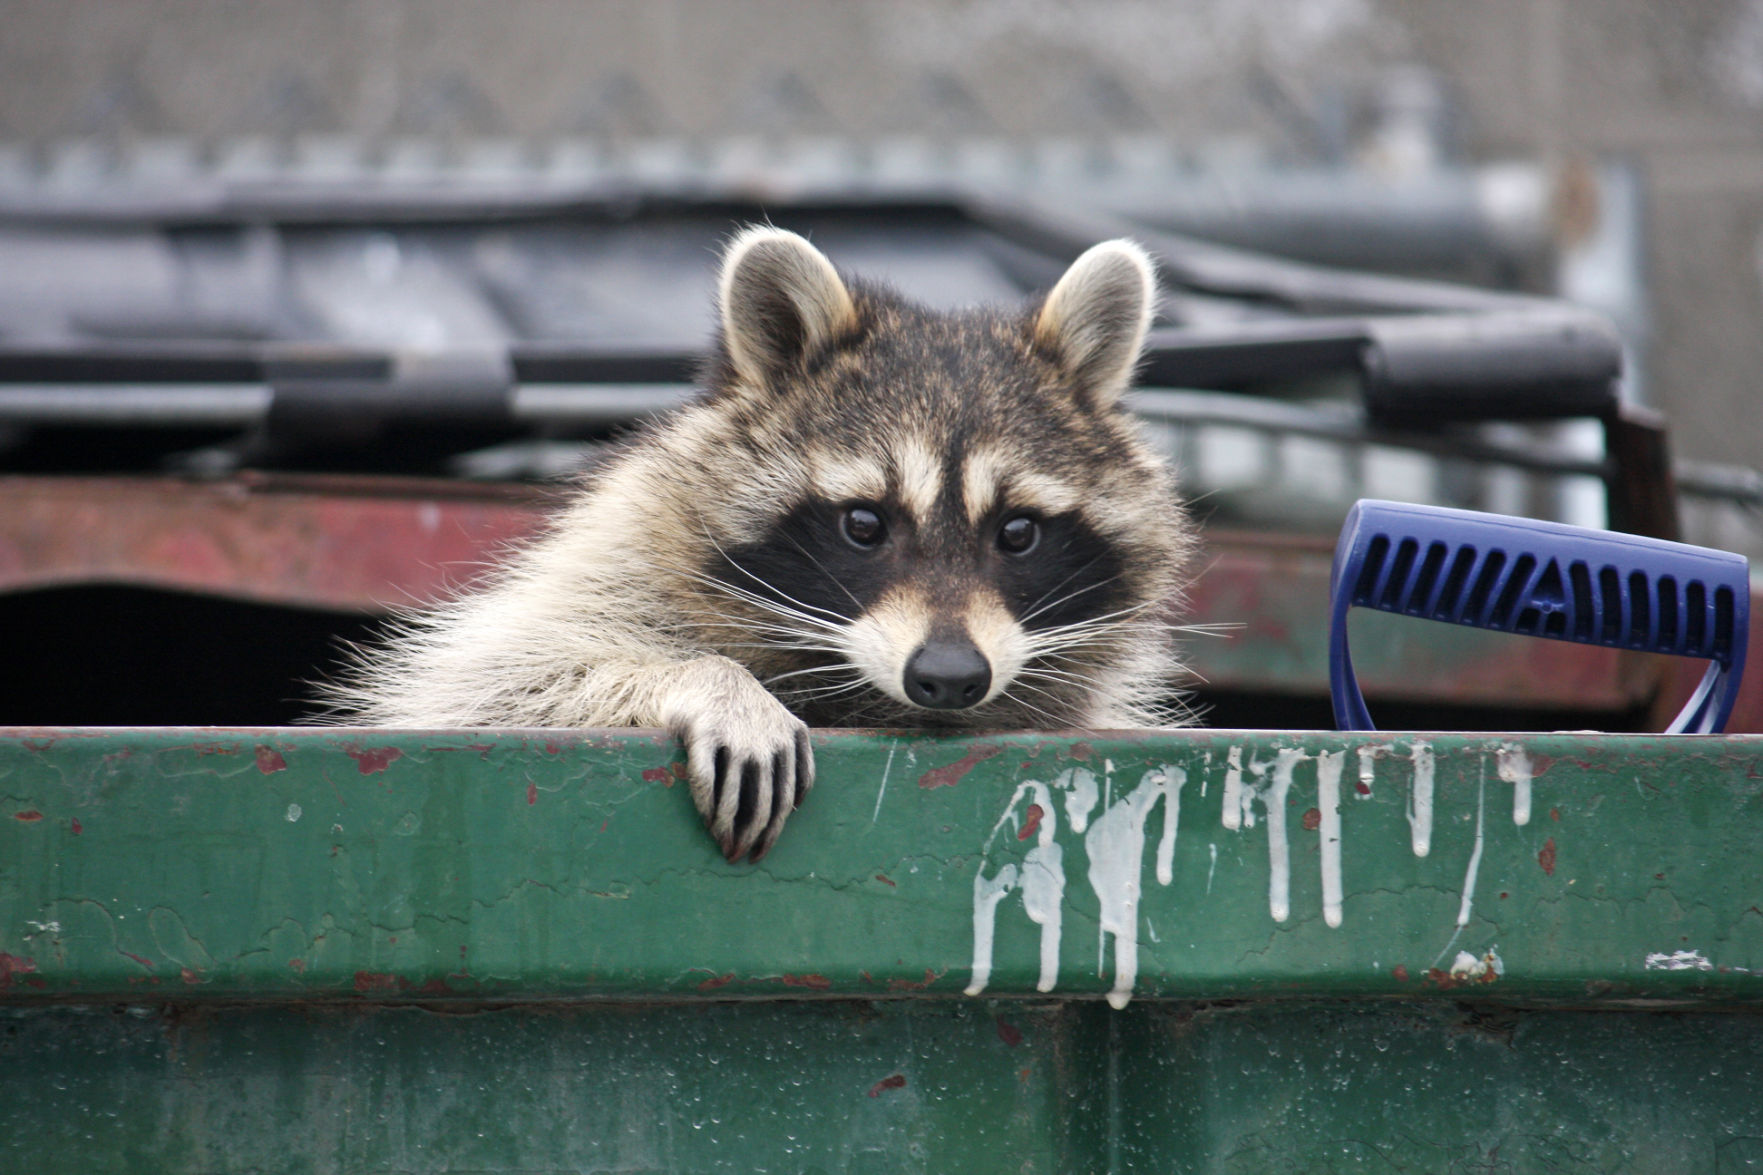 Raccoon rescue reminds residents to keep trash out of reach of wild animals Plano Star Courier starlocalmedia